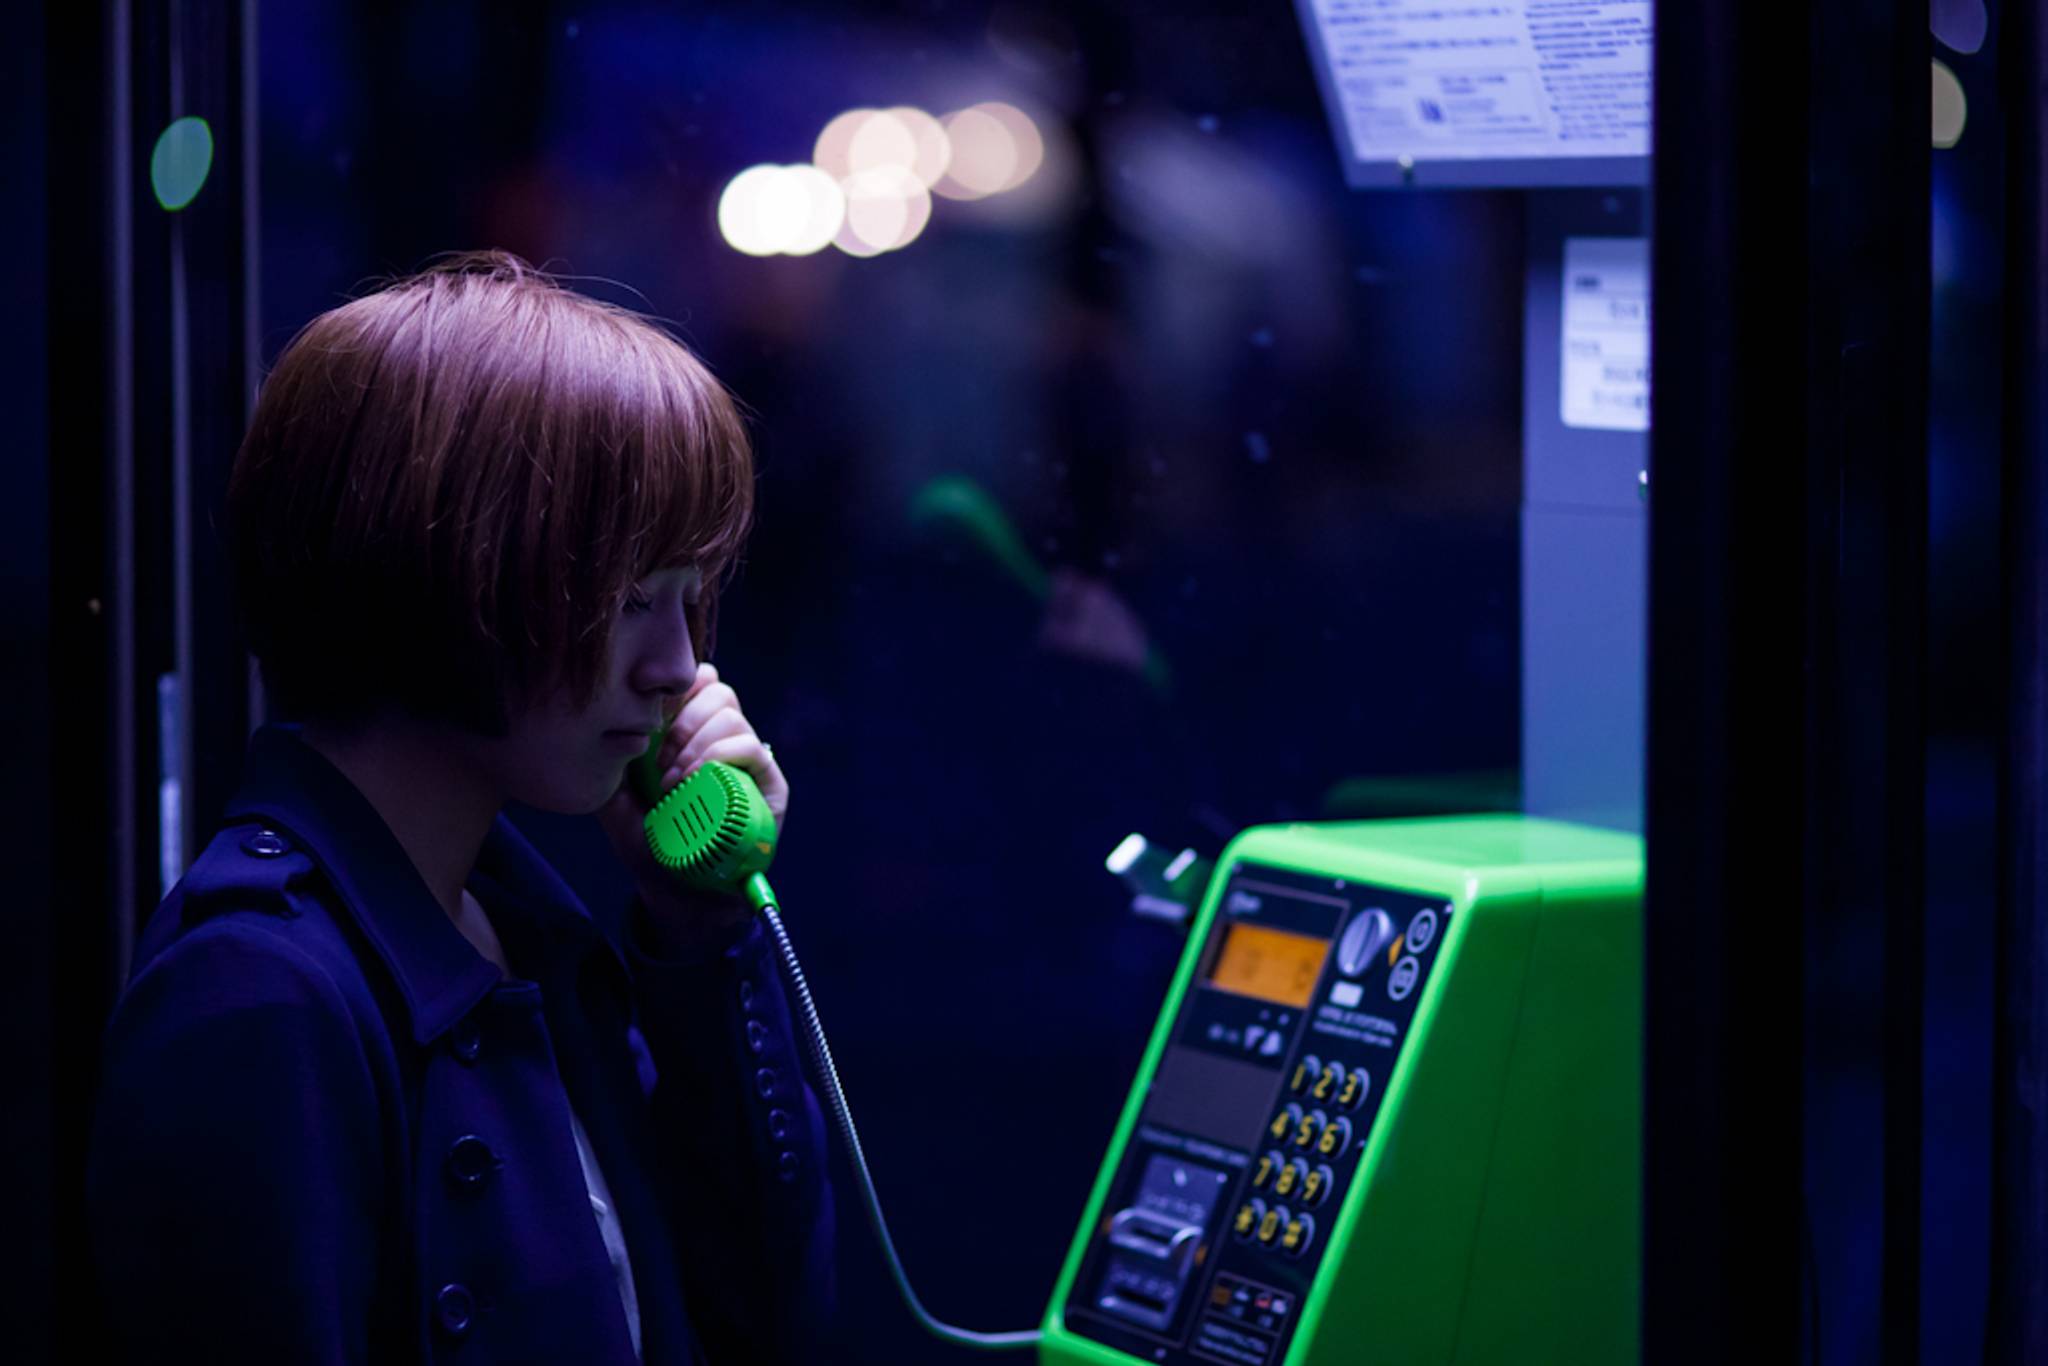 Japanese people visit phone booth to speak to the dead